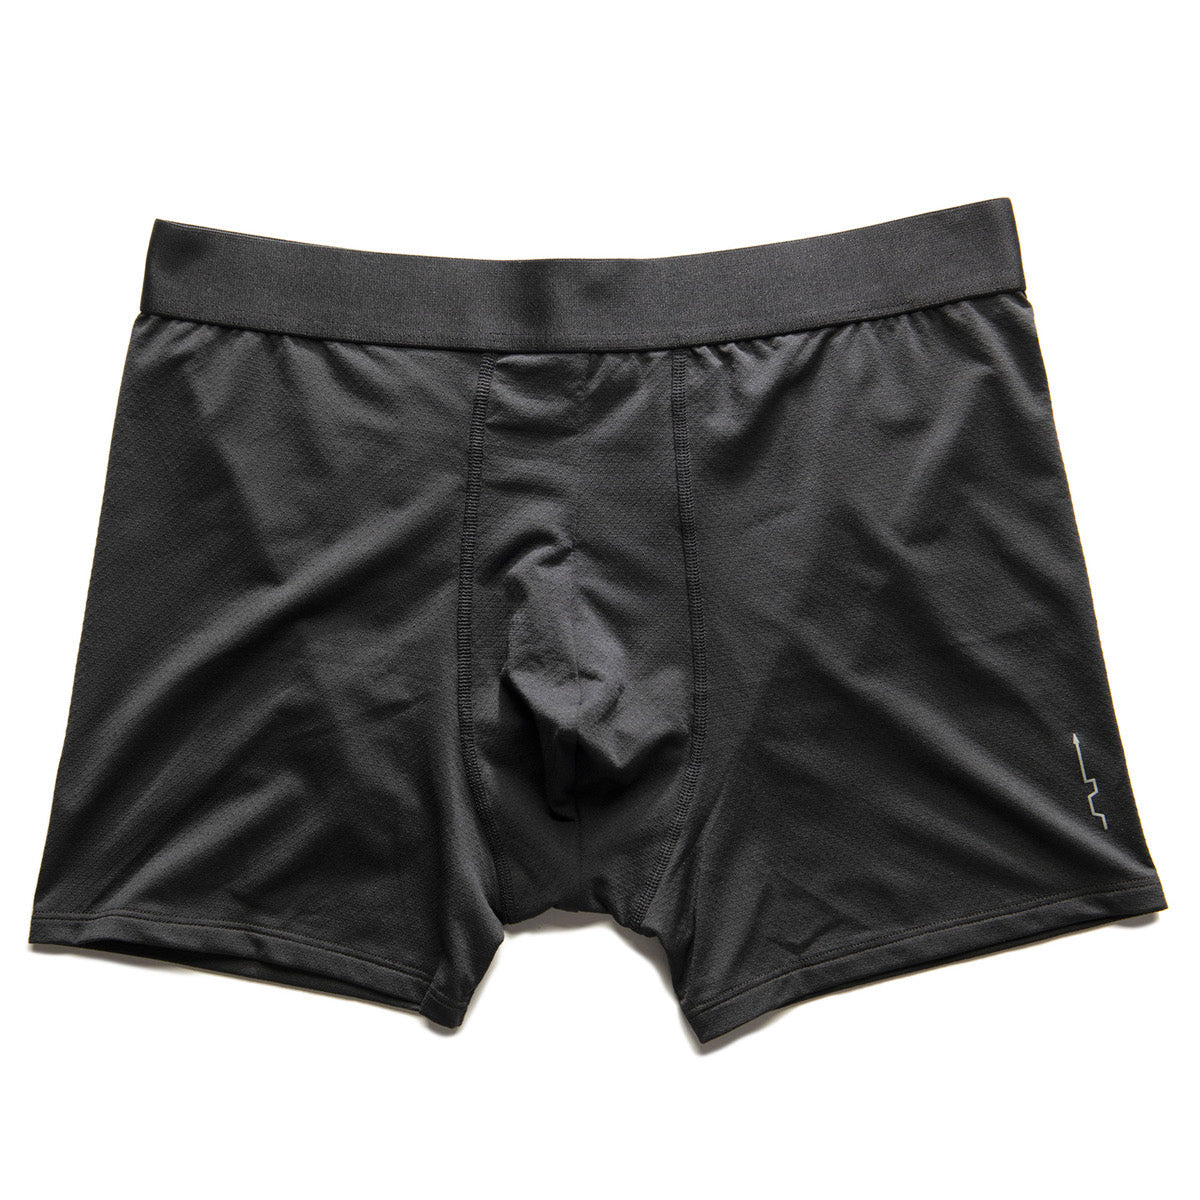 Tahoe CL Base Liner in Black, Best Mens Running Underwear | PATH projects